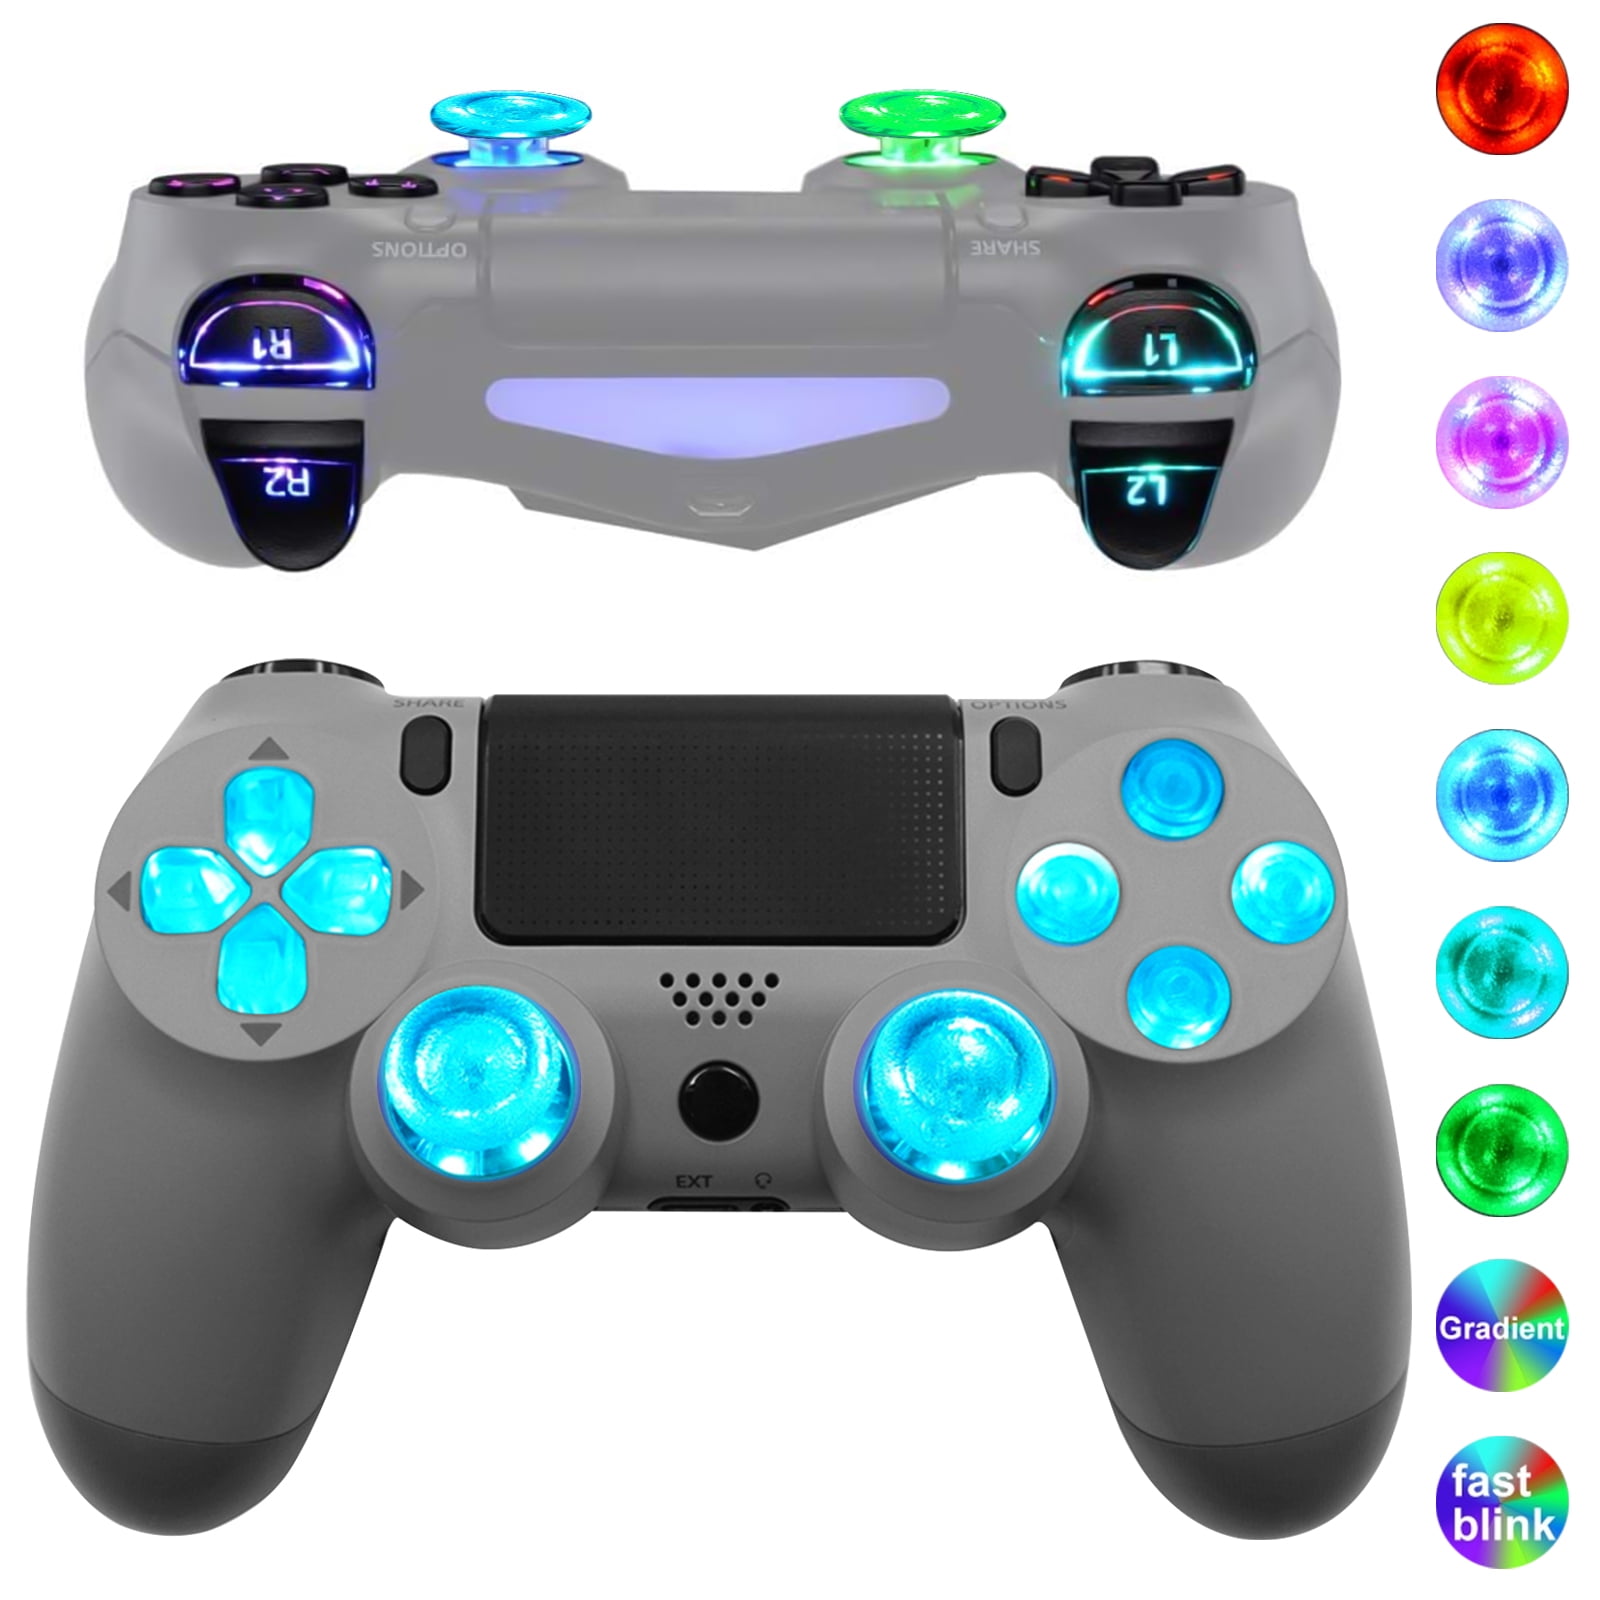 Multi-Colors Luminated D-Pad Sticks, Face Buttons, LED Kit, 7 Colors 9 Modes with Classical Symbols Buttons for PS4, PS4 Pro, Slim- NOT Included - Walmart.com